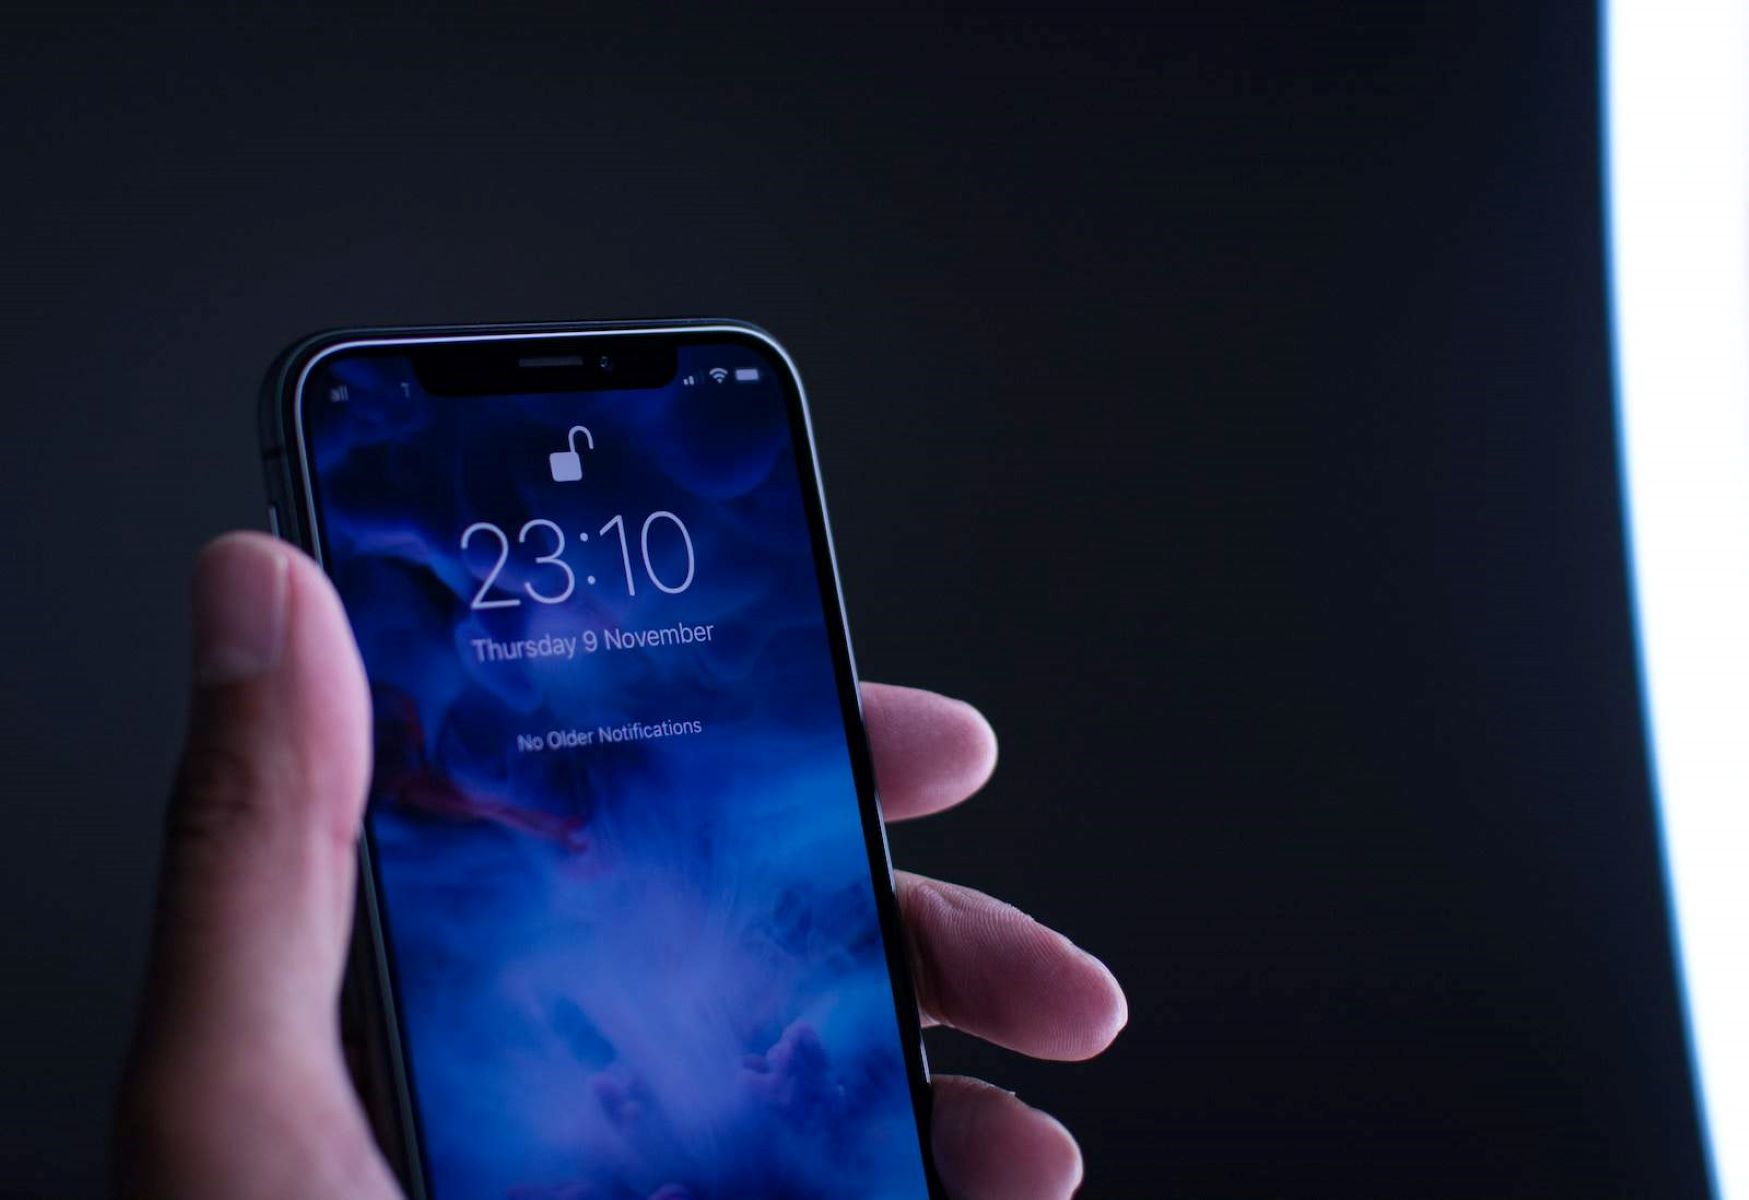 AT&T Unlock IPhone 11: Guidelines For Unlocking Your Device Through AT&T